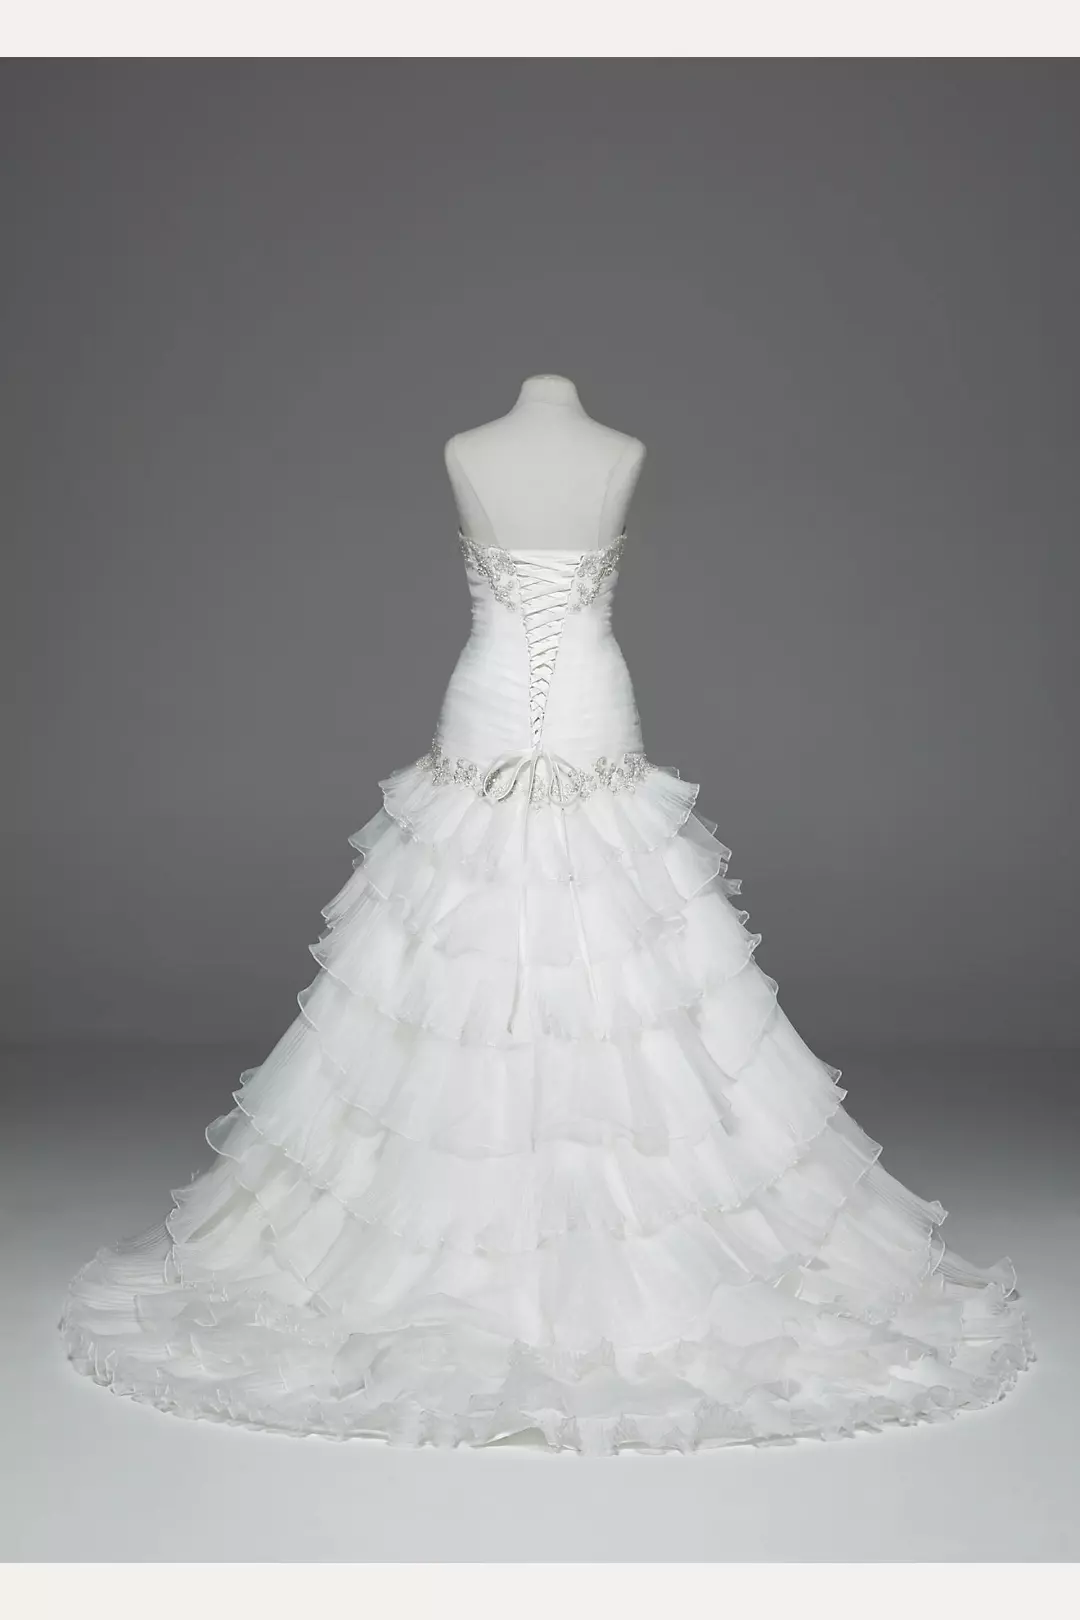 Pleated Wedding Dress with Tiers and Lace-Up Back  Image 2